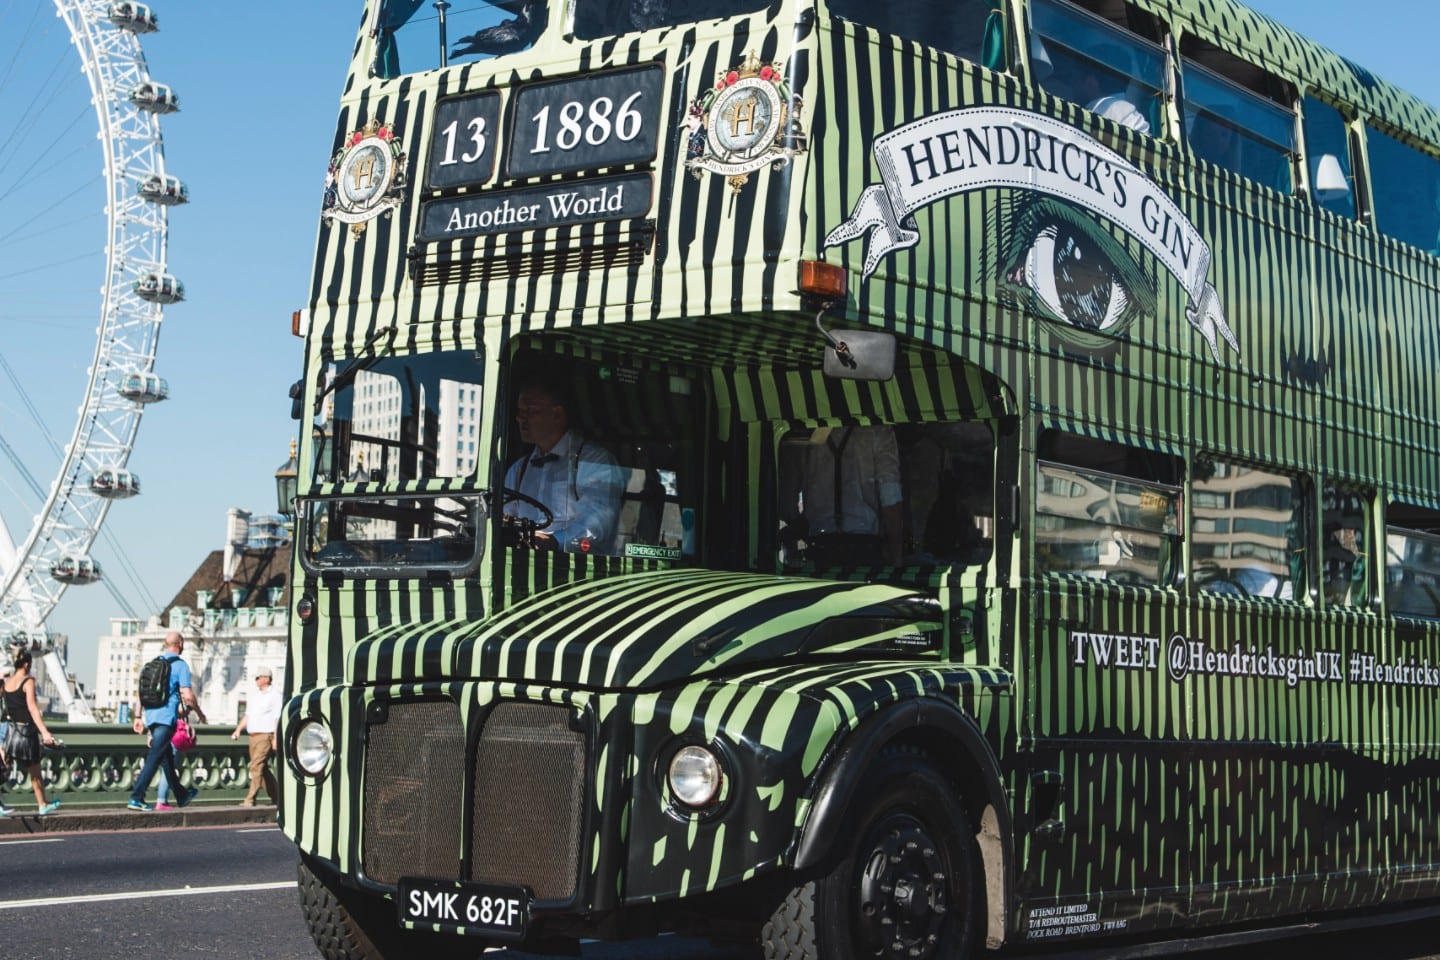 Routemaster bus branded by Hendrick's Gin